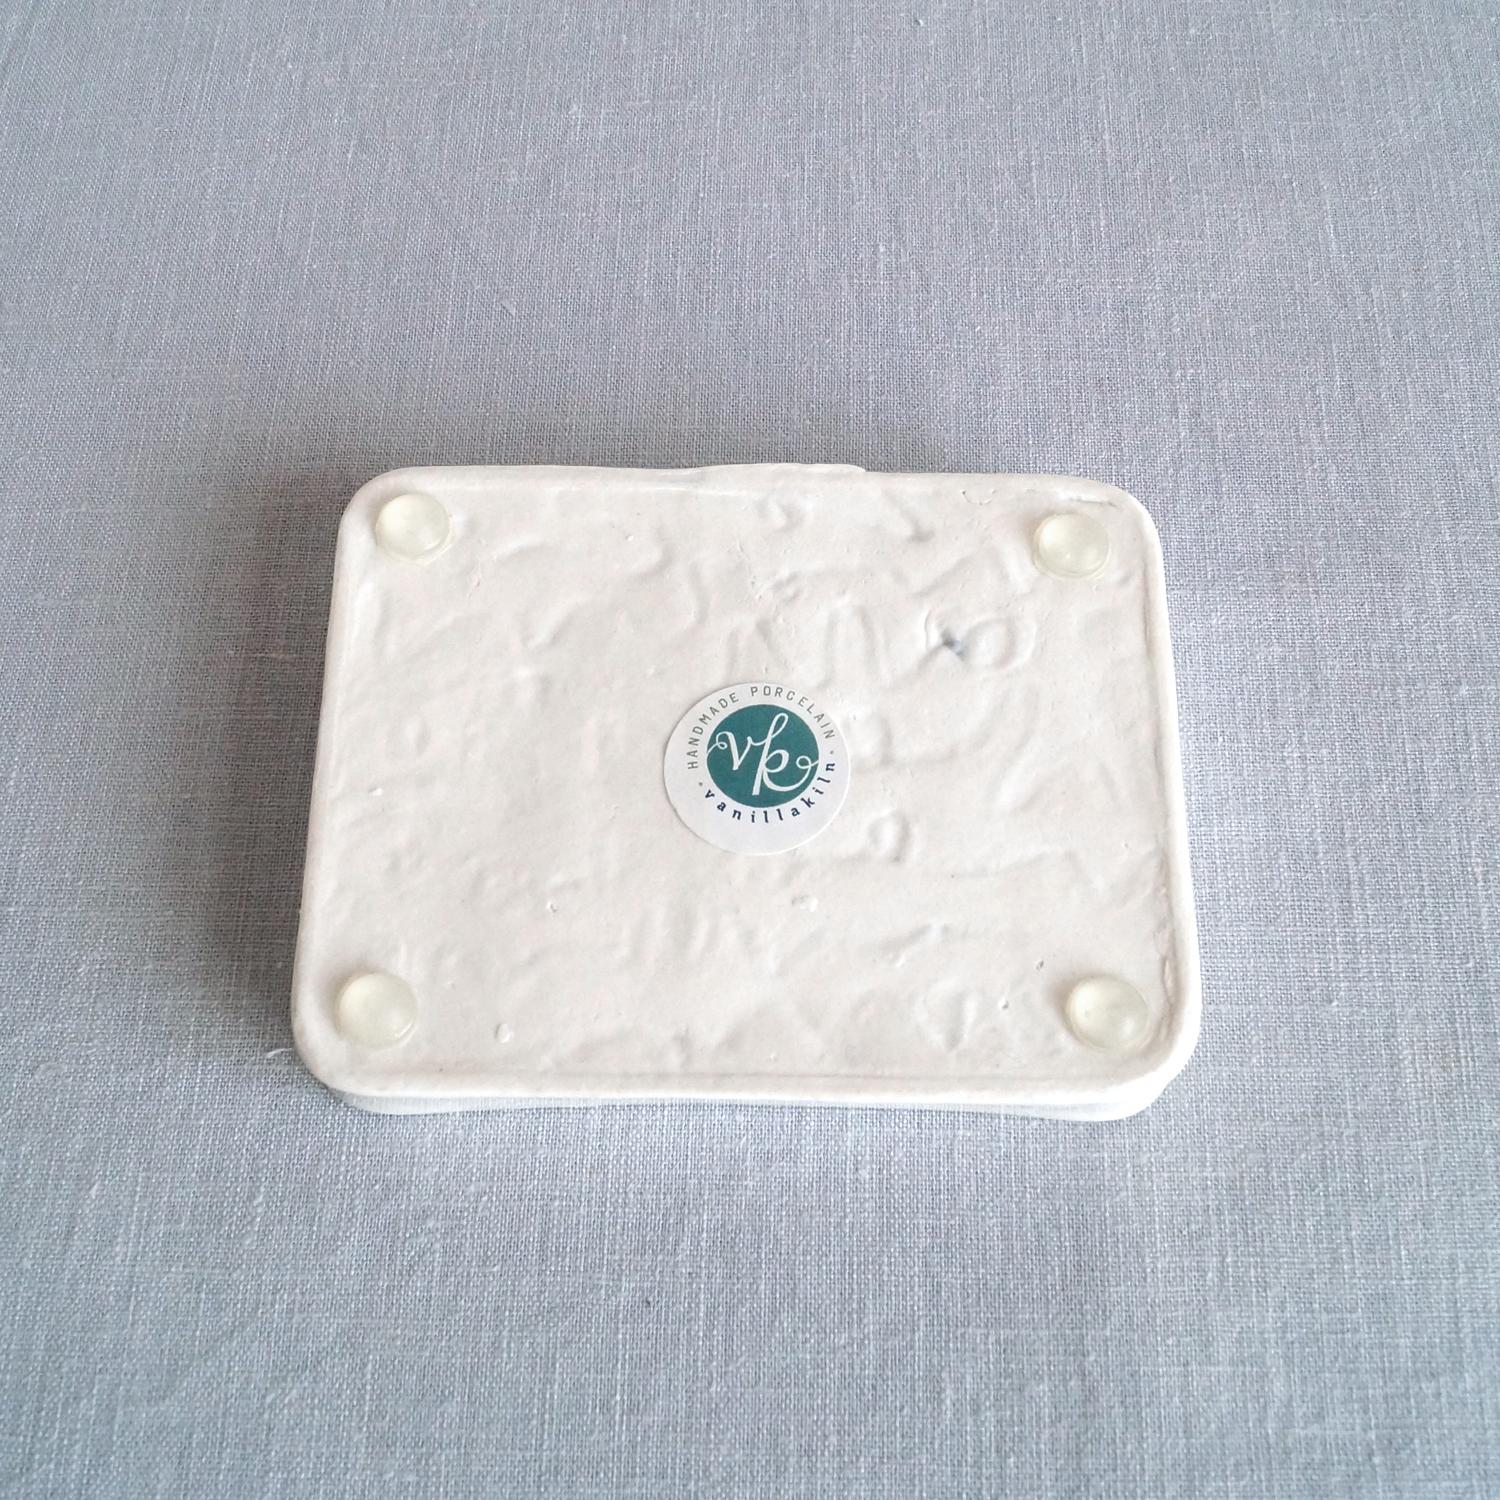 Water lily soap dish, lily pond, rectangular soap dish, jewellery dish, bathroom accessory, bathroom storage, counter top soap dish, bathroom ceramics, ceramic soap dish, porcelain soap dish, blue white porcelain, white porcelain soap dish, blue ceramic s